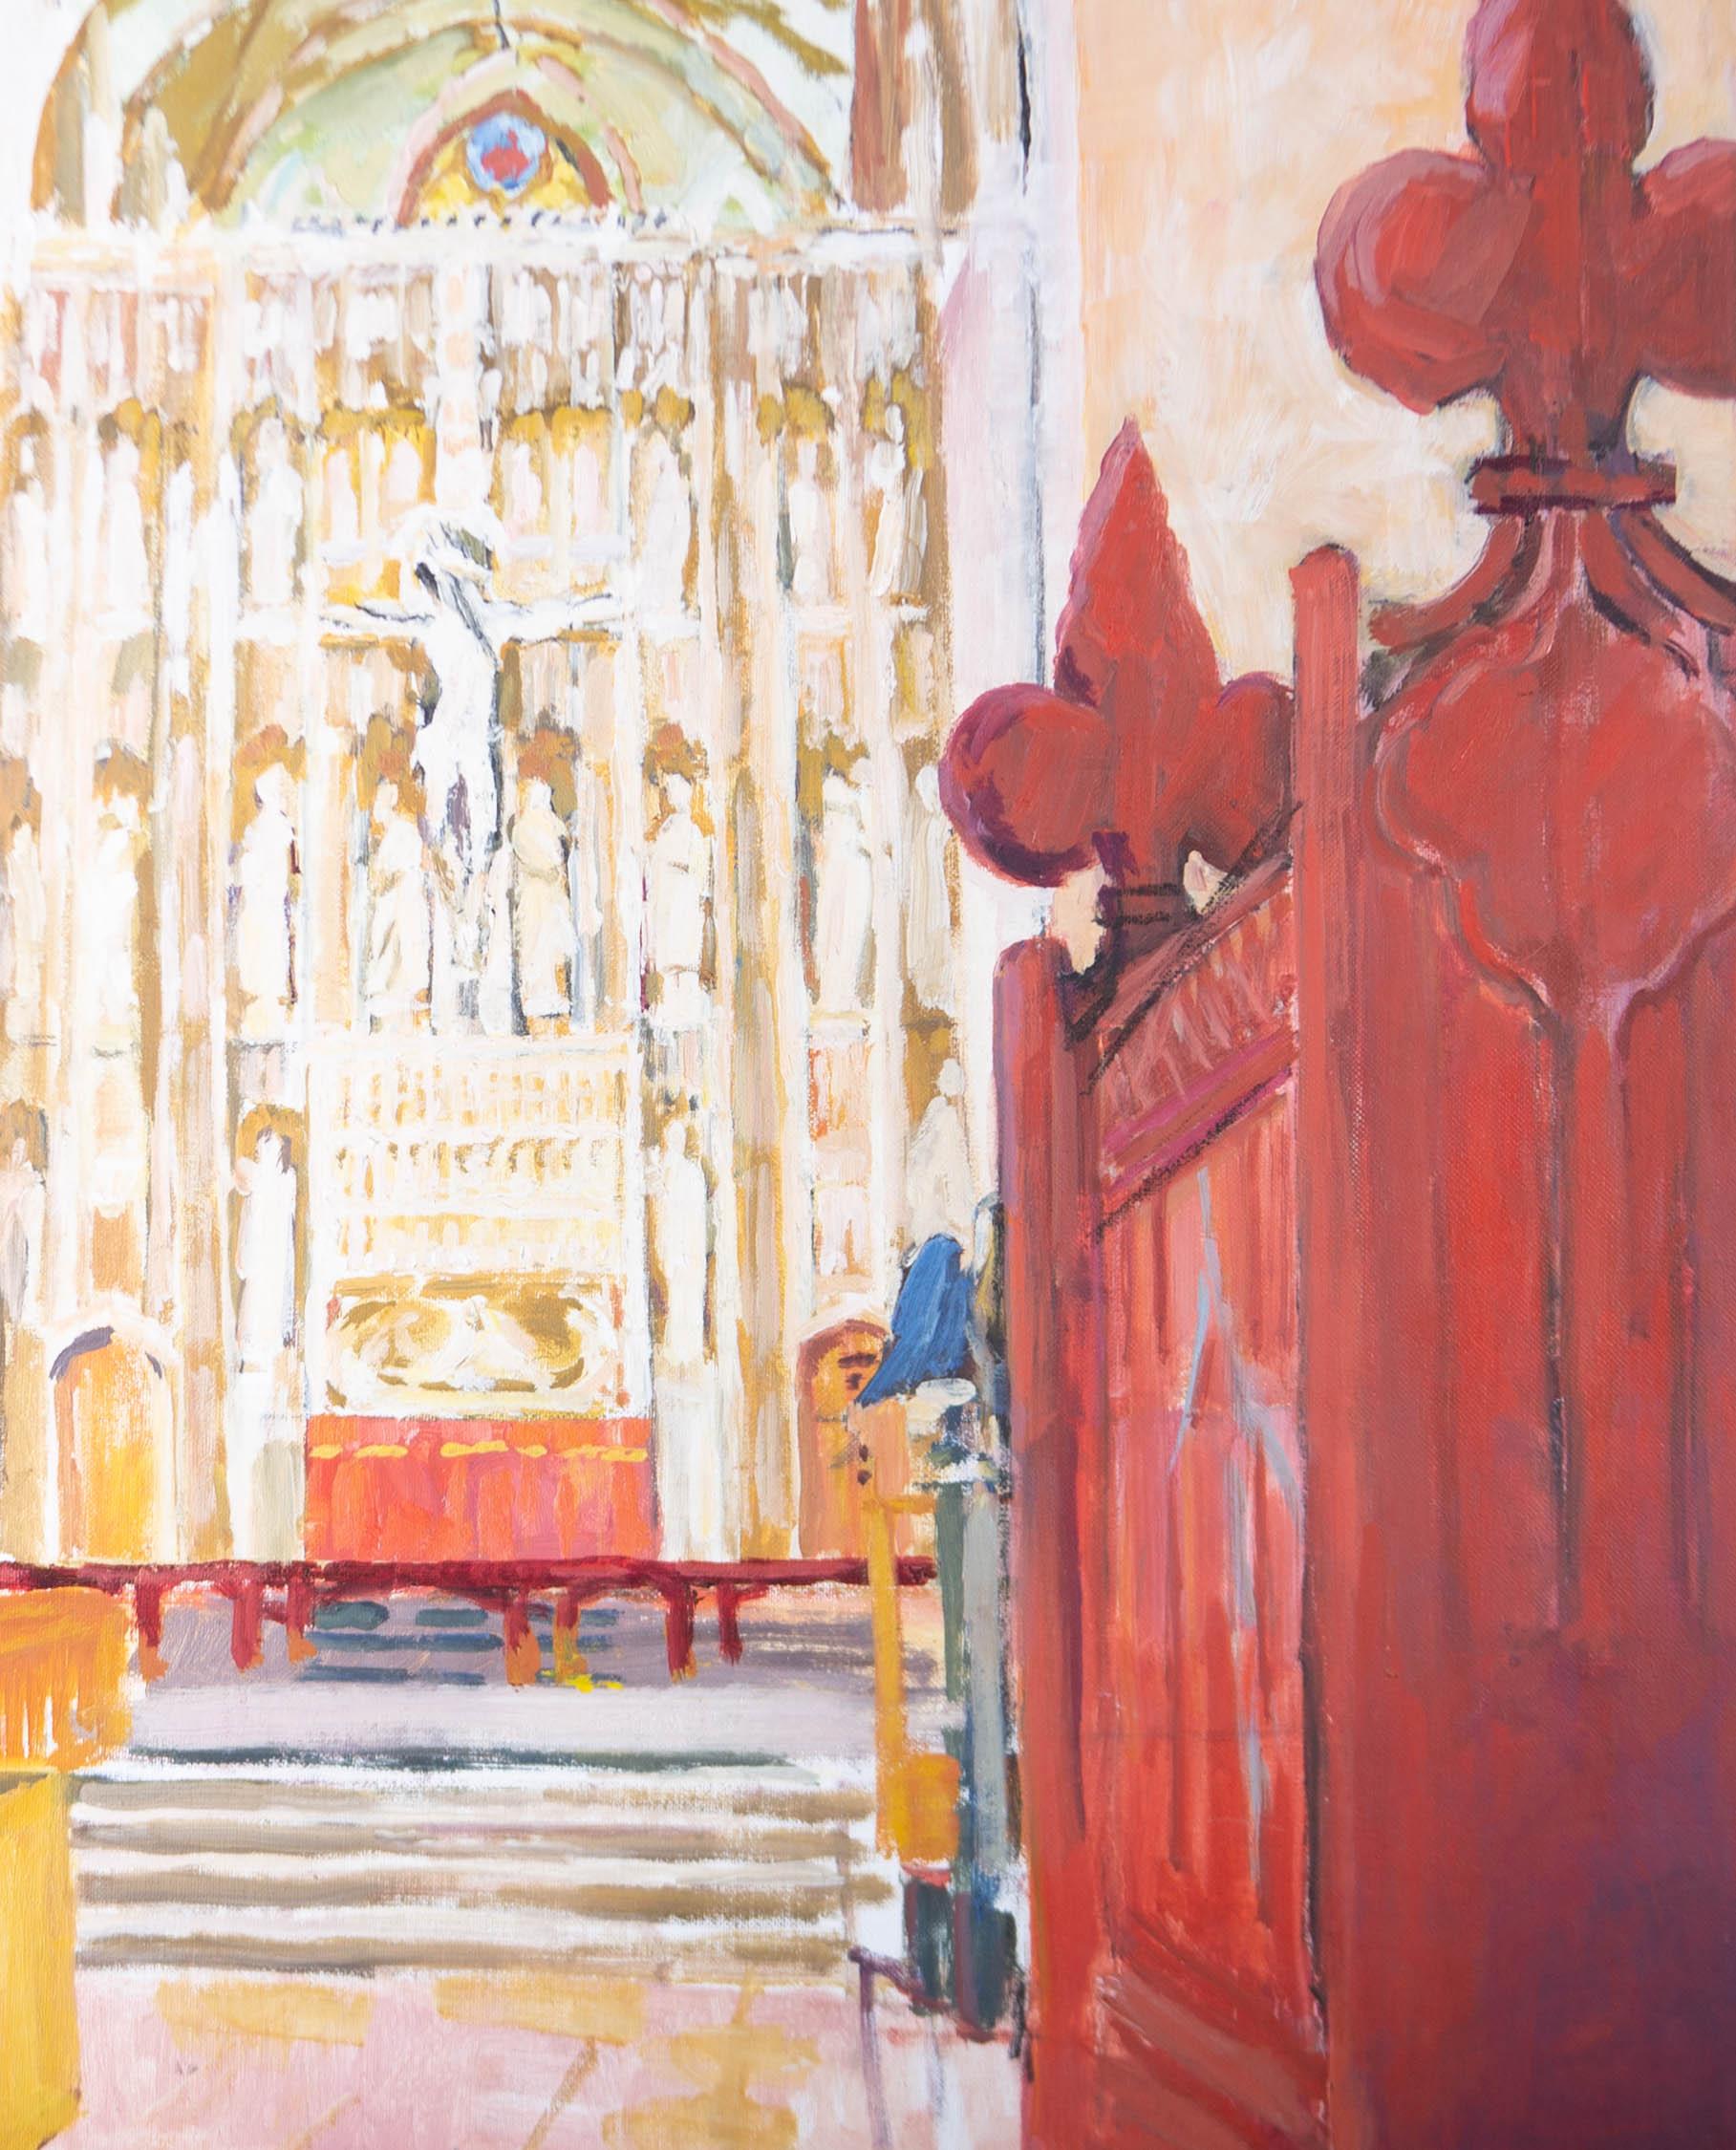 A fine, colourful study of a church interior by the artist Pamela Chard. Well presented in a distress-effect wood frame. Unsigned. On canvas board.